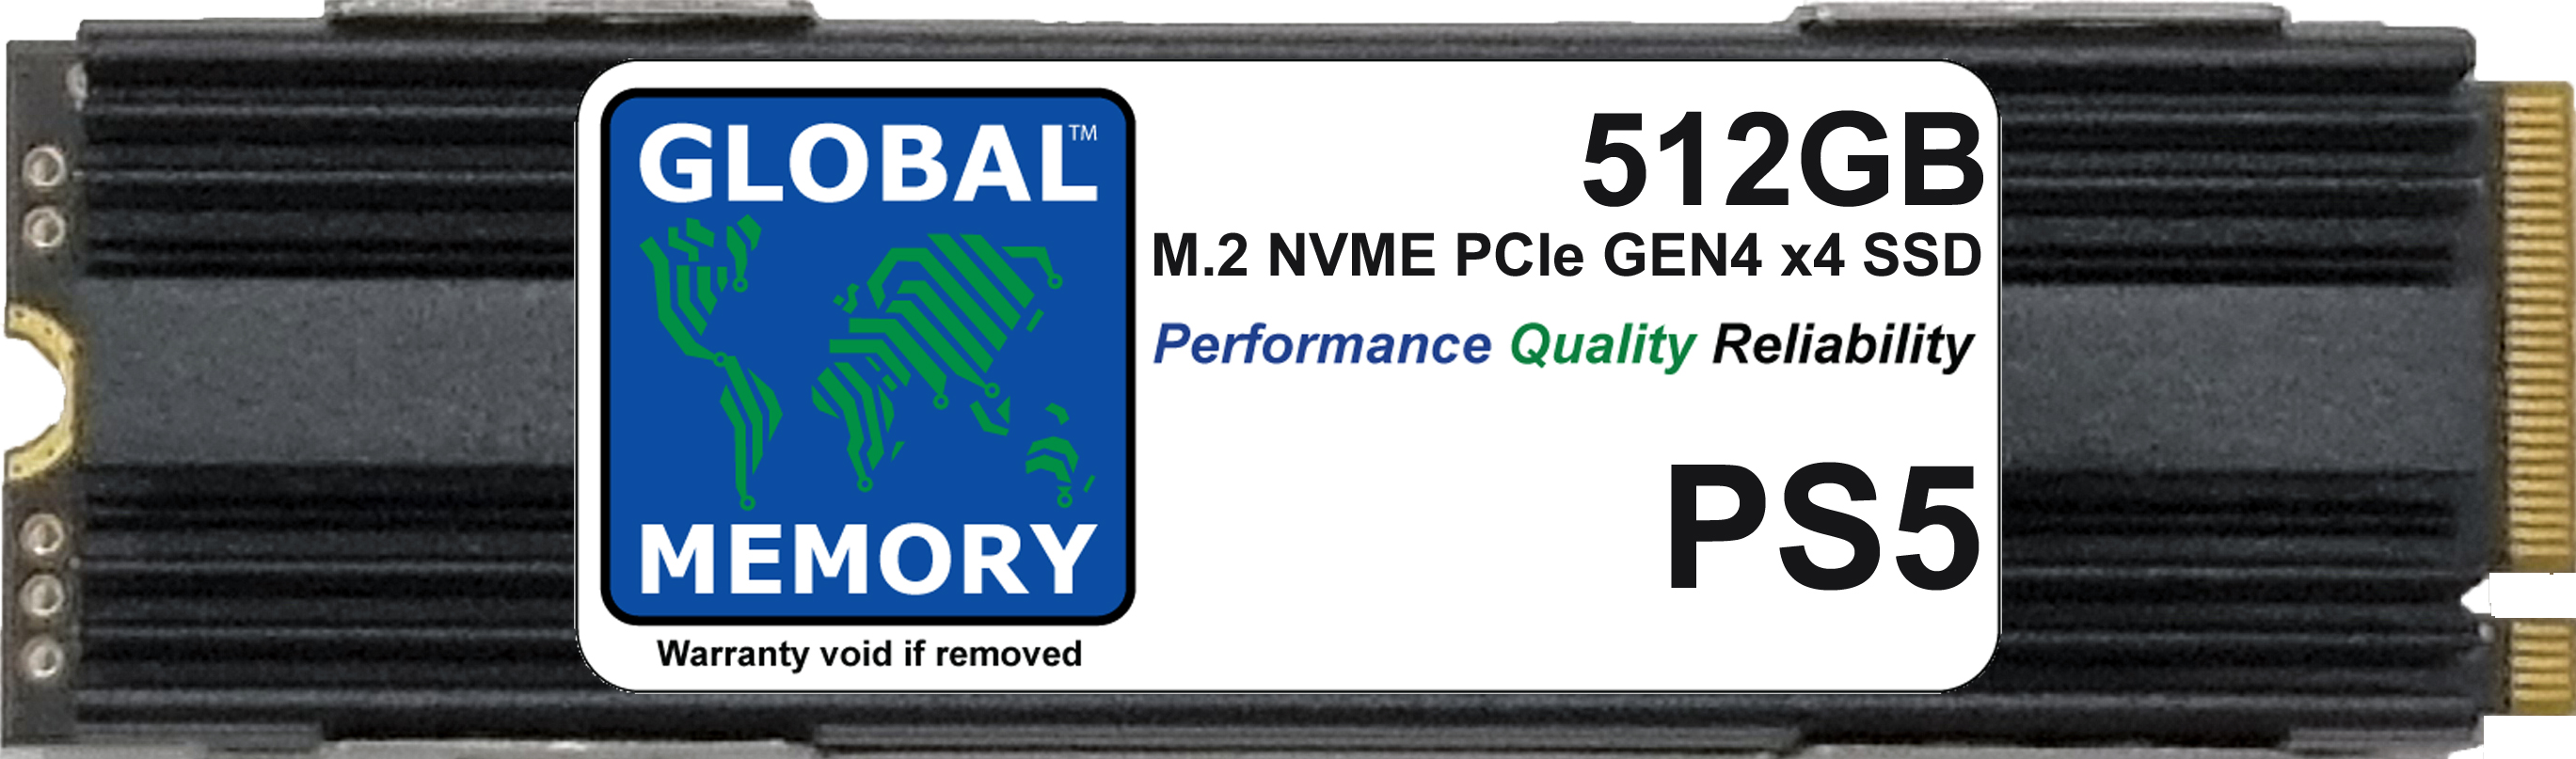 512GB M.2 2280 PCIe Gen4 x4 NVMe SSD WITH DRAM + HEATSINK FOR PLAYSTATION 5 (PS5) - Click Image to Close